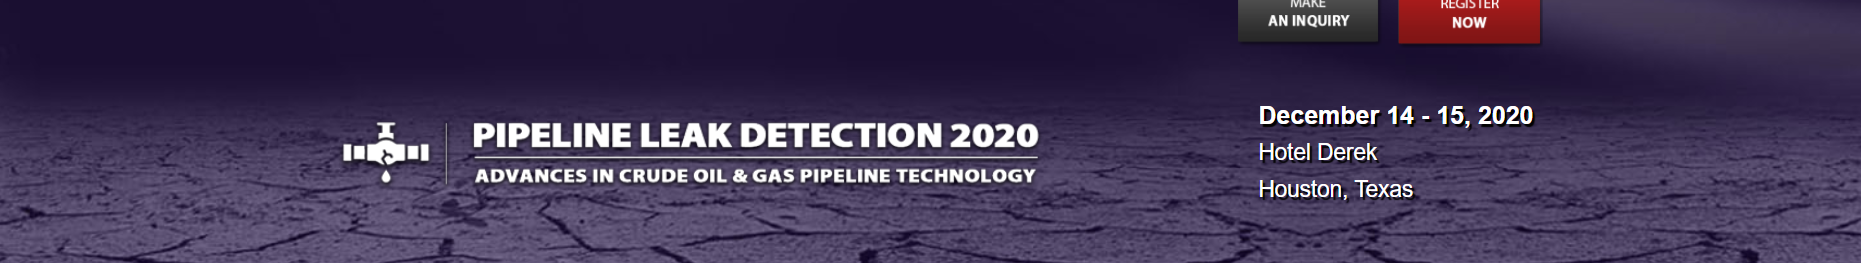 Physical Conference - Pipeline Leak Detection 2020, Houston, Texas, United States